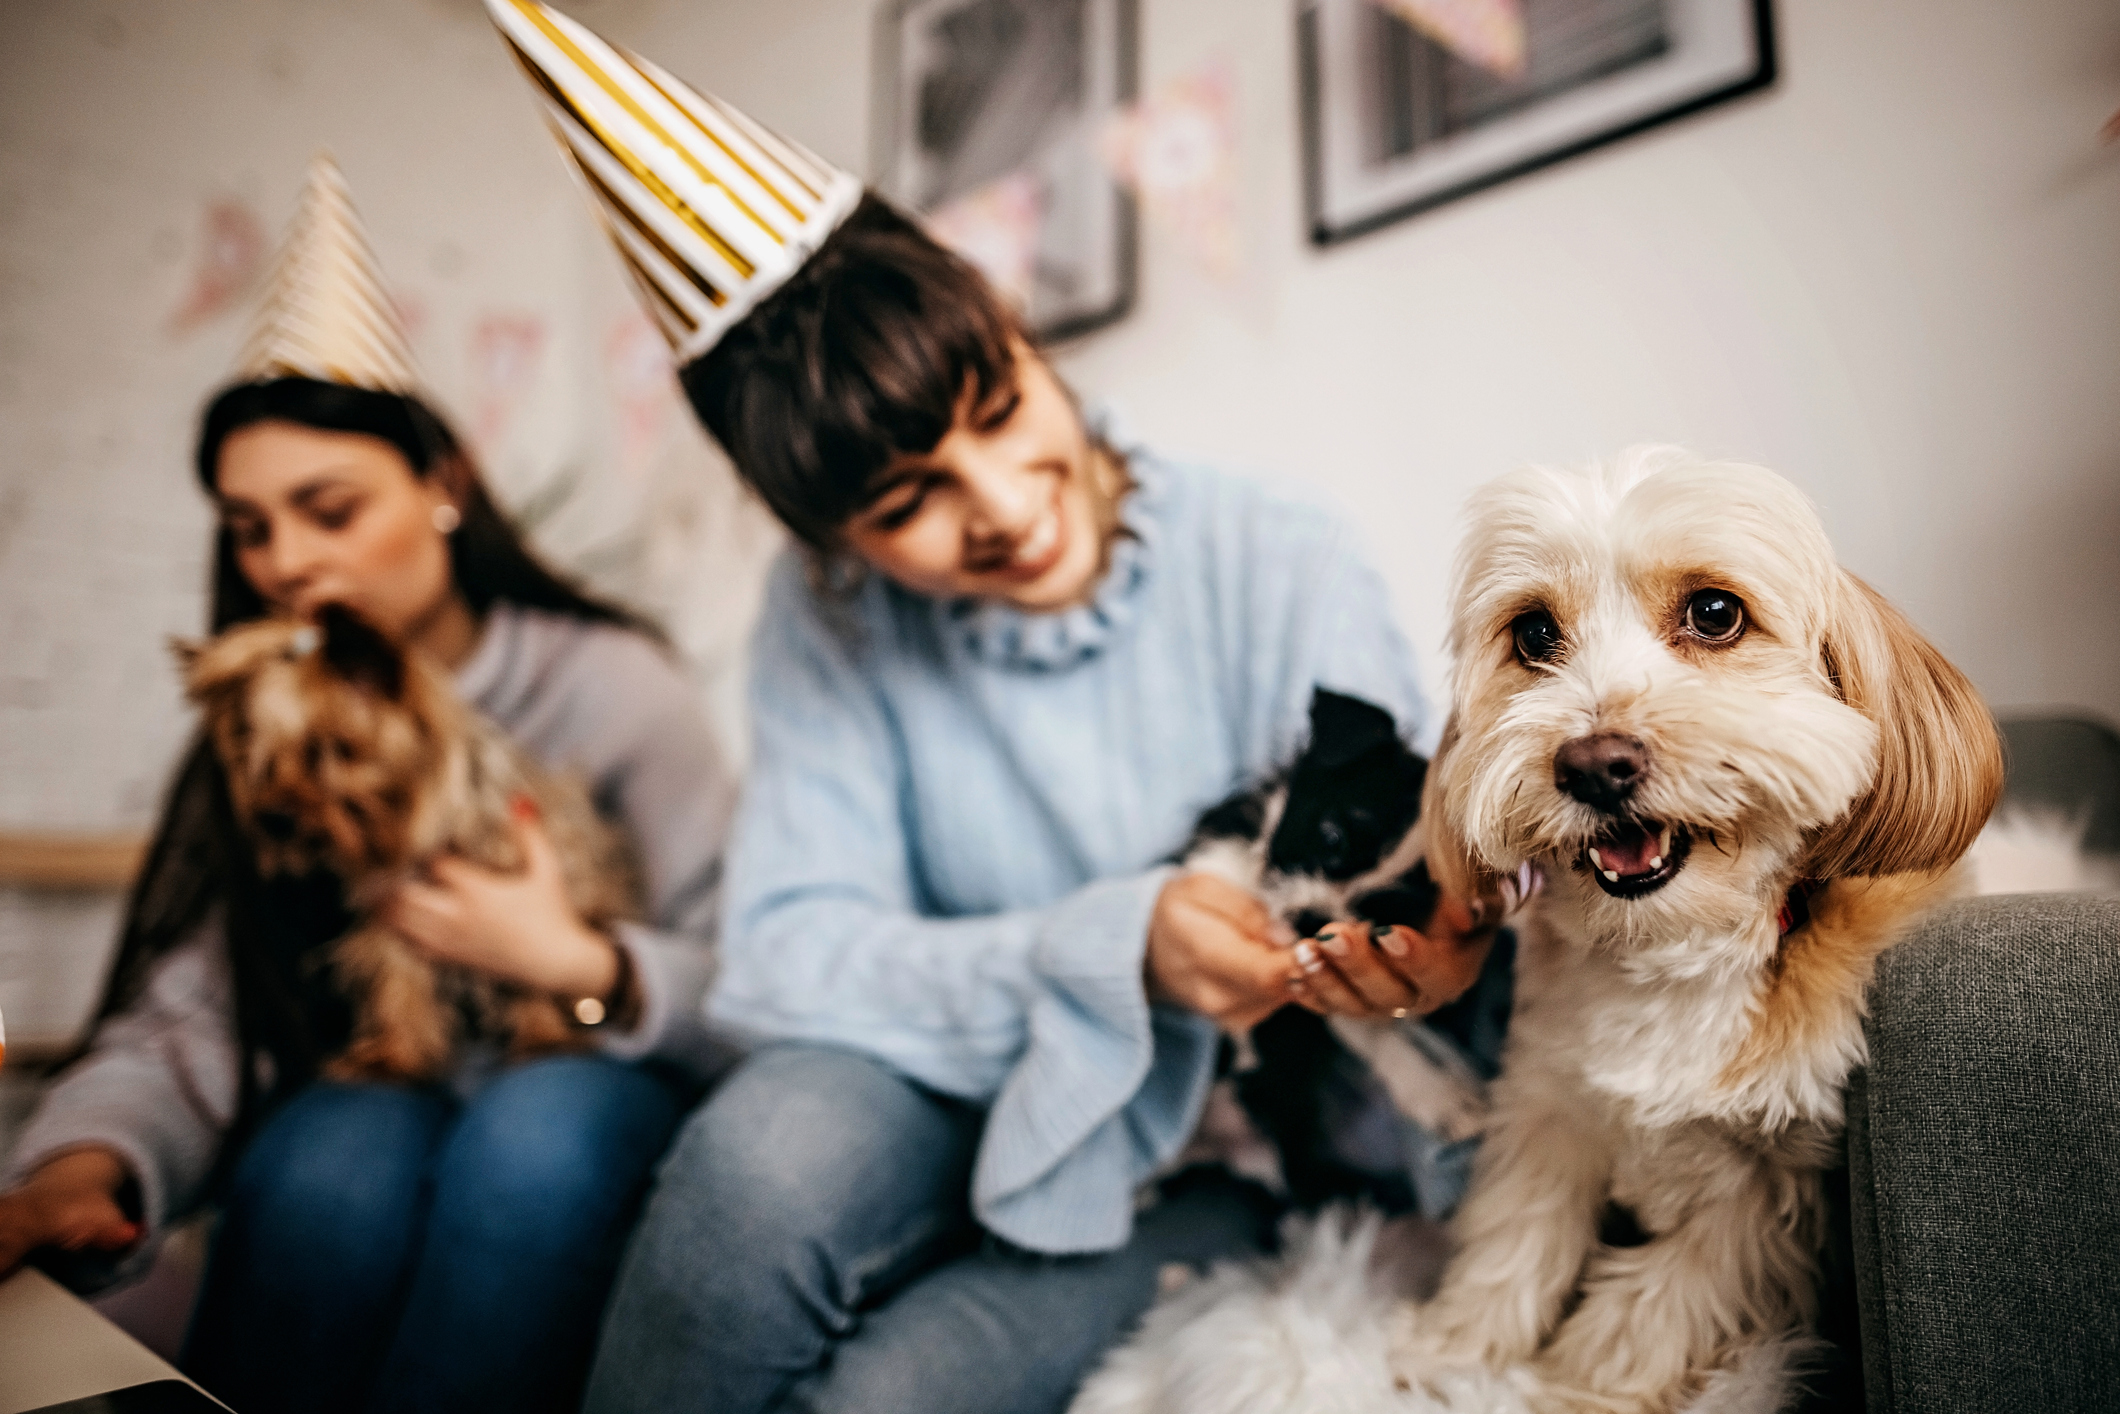 Dogs and people wearing party hats on a couch during a new year’s eve party